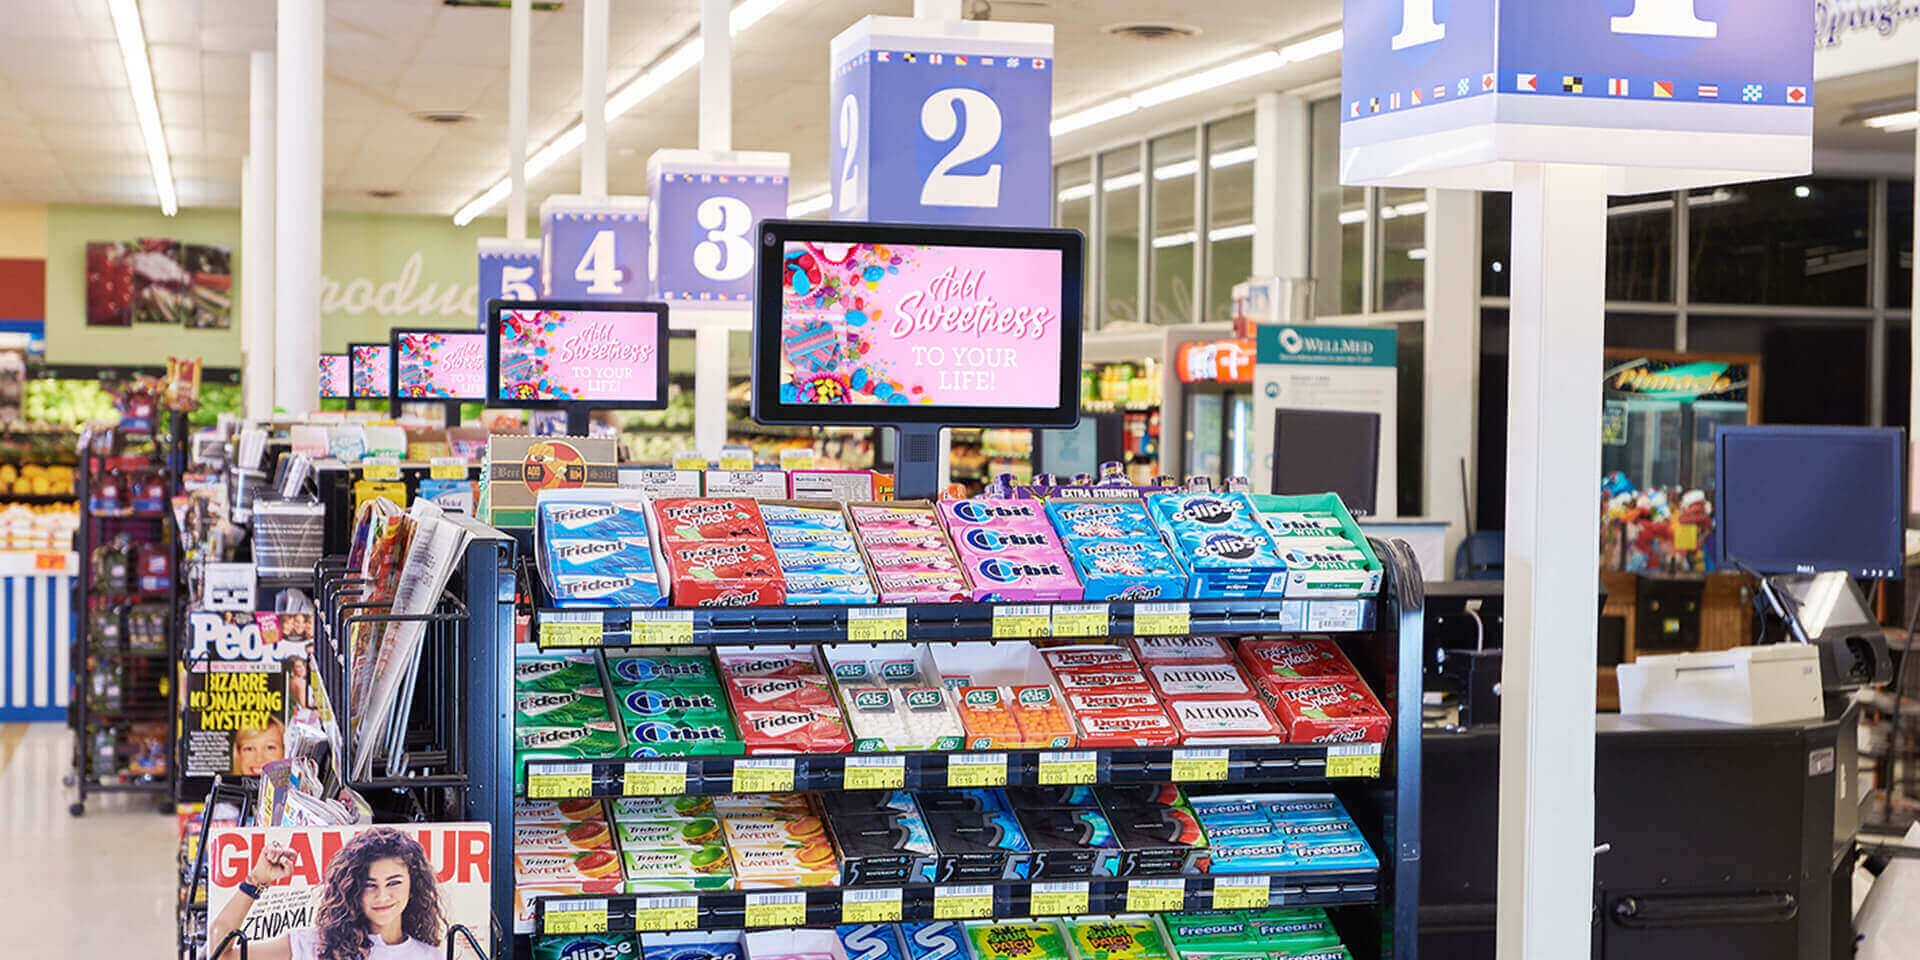 Grocery store point-of-purchase DOOH screen at checkout